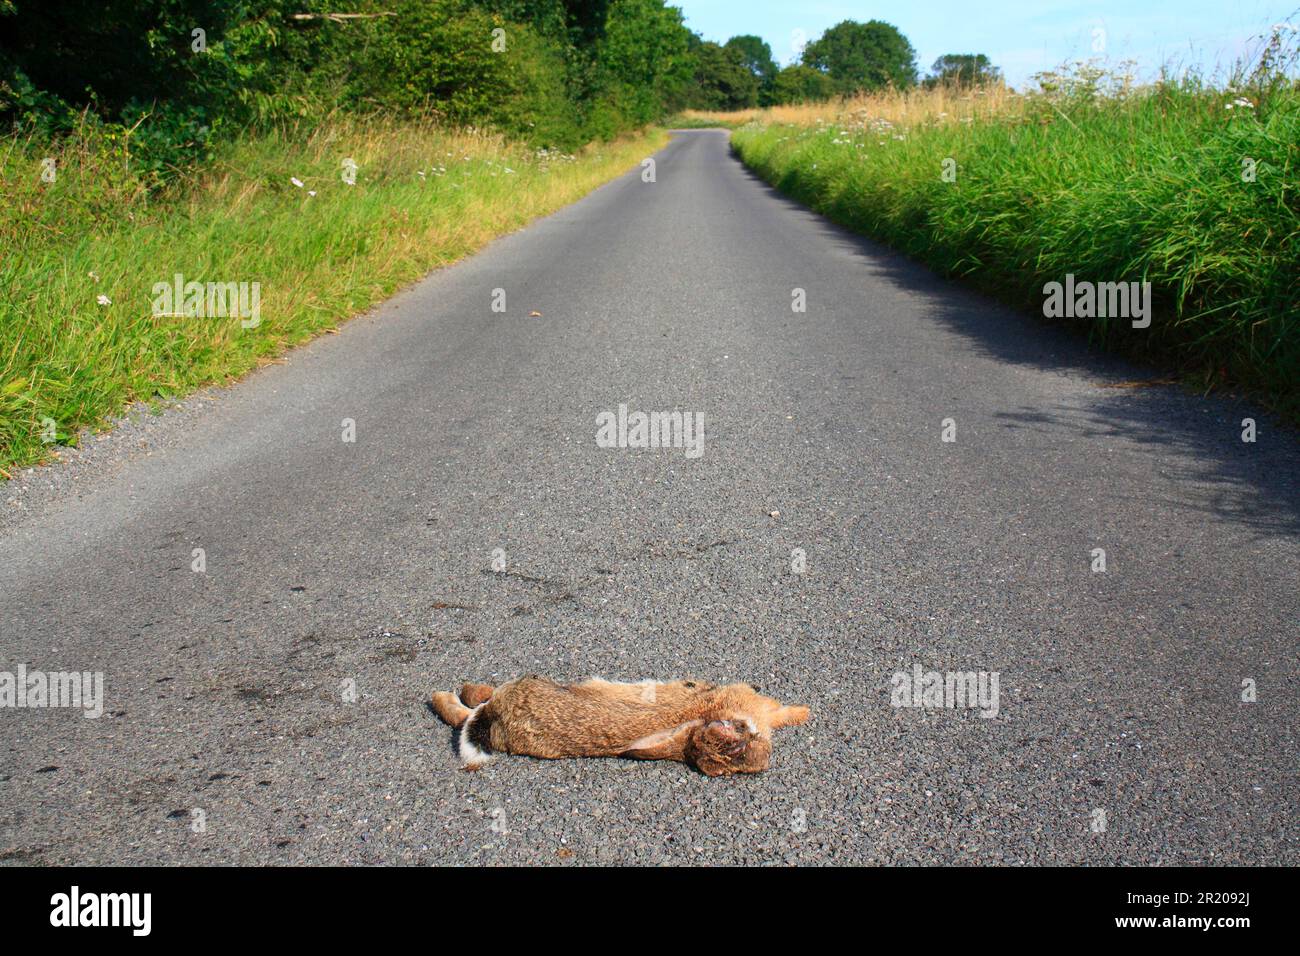 European rabbit (Oryctolagus cuniculus) dead adult killed on a country lane, South Lopham, Norfolk, England, United Kingdom Stock Photo